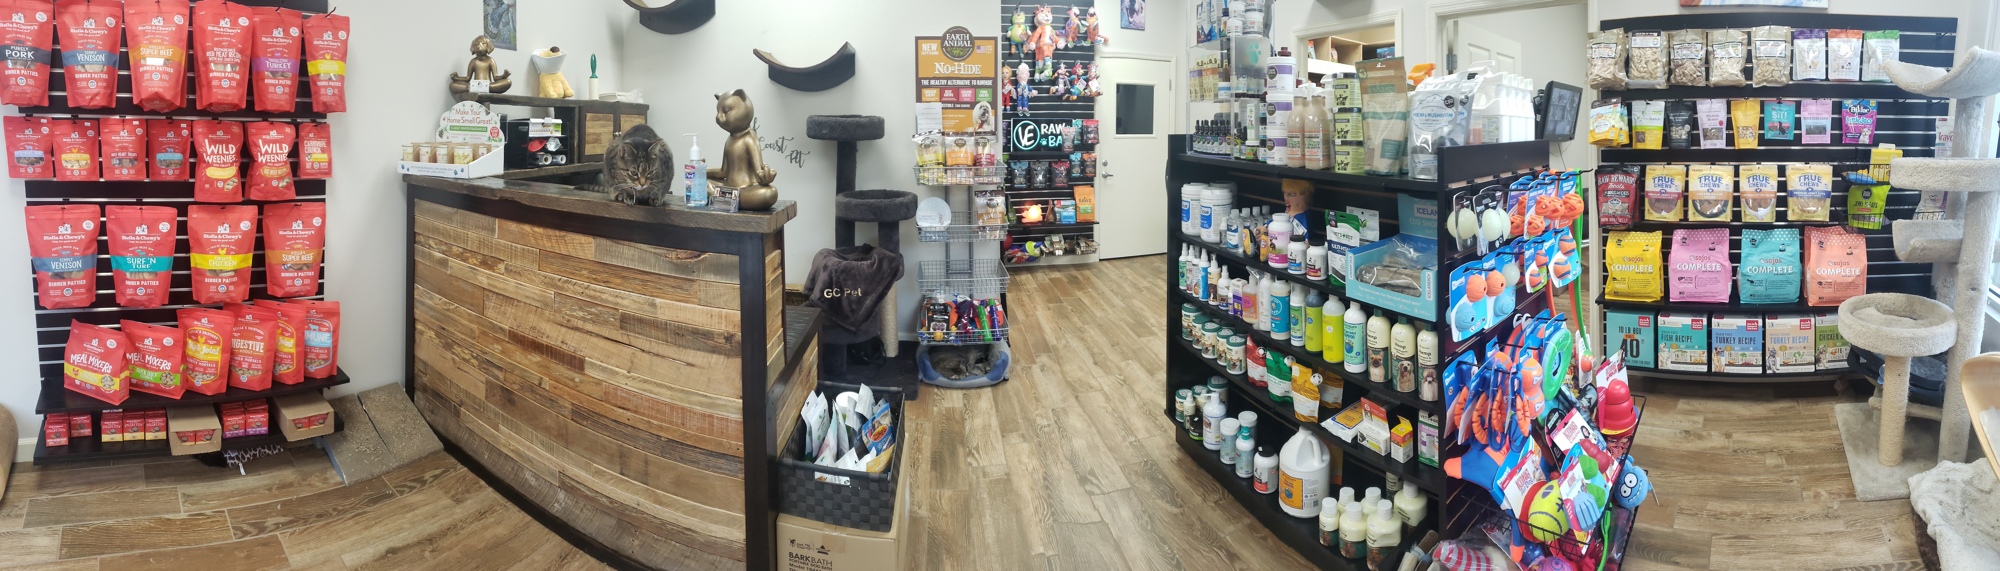 Courtesy. Tricia Bolds, president and CEO of Sarasota-based Gulf Coast Pet Supplies, says sanitizing products are being promoted to pet owners. 